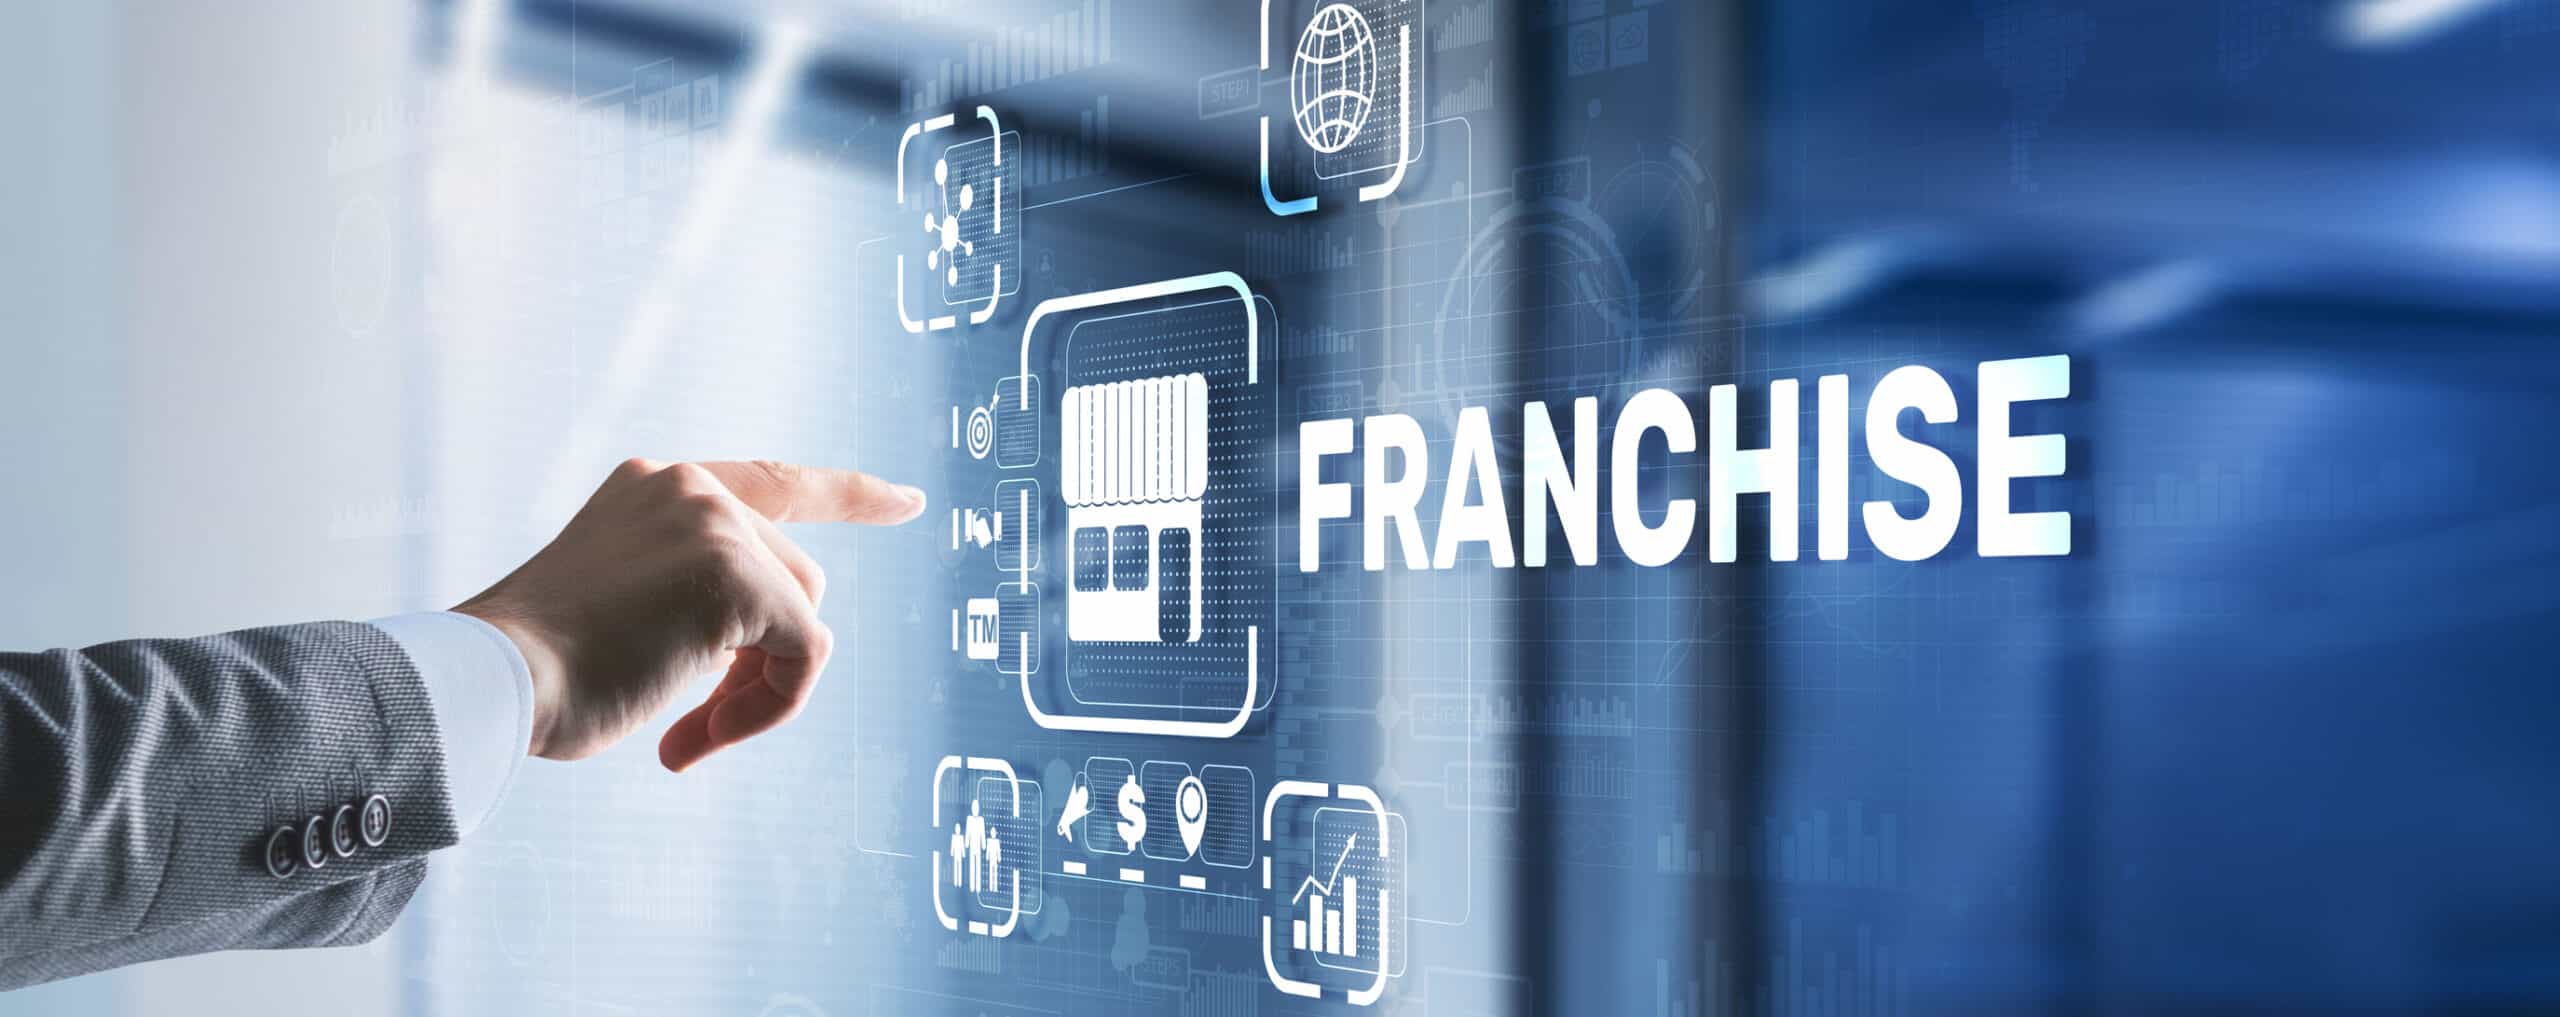 What Are The Major Responsibilities Of A Franchisee?